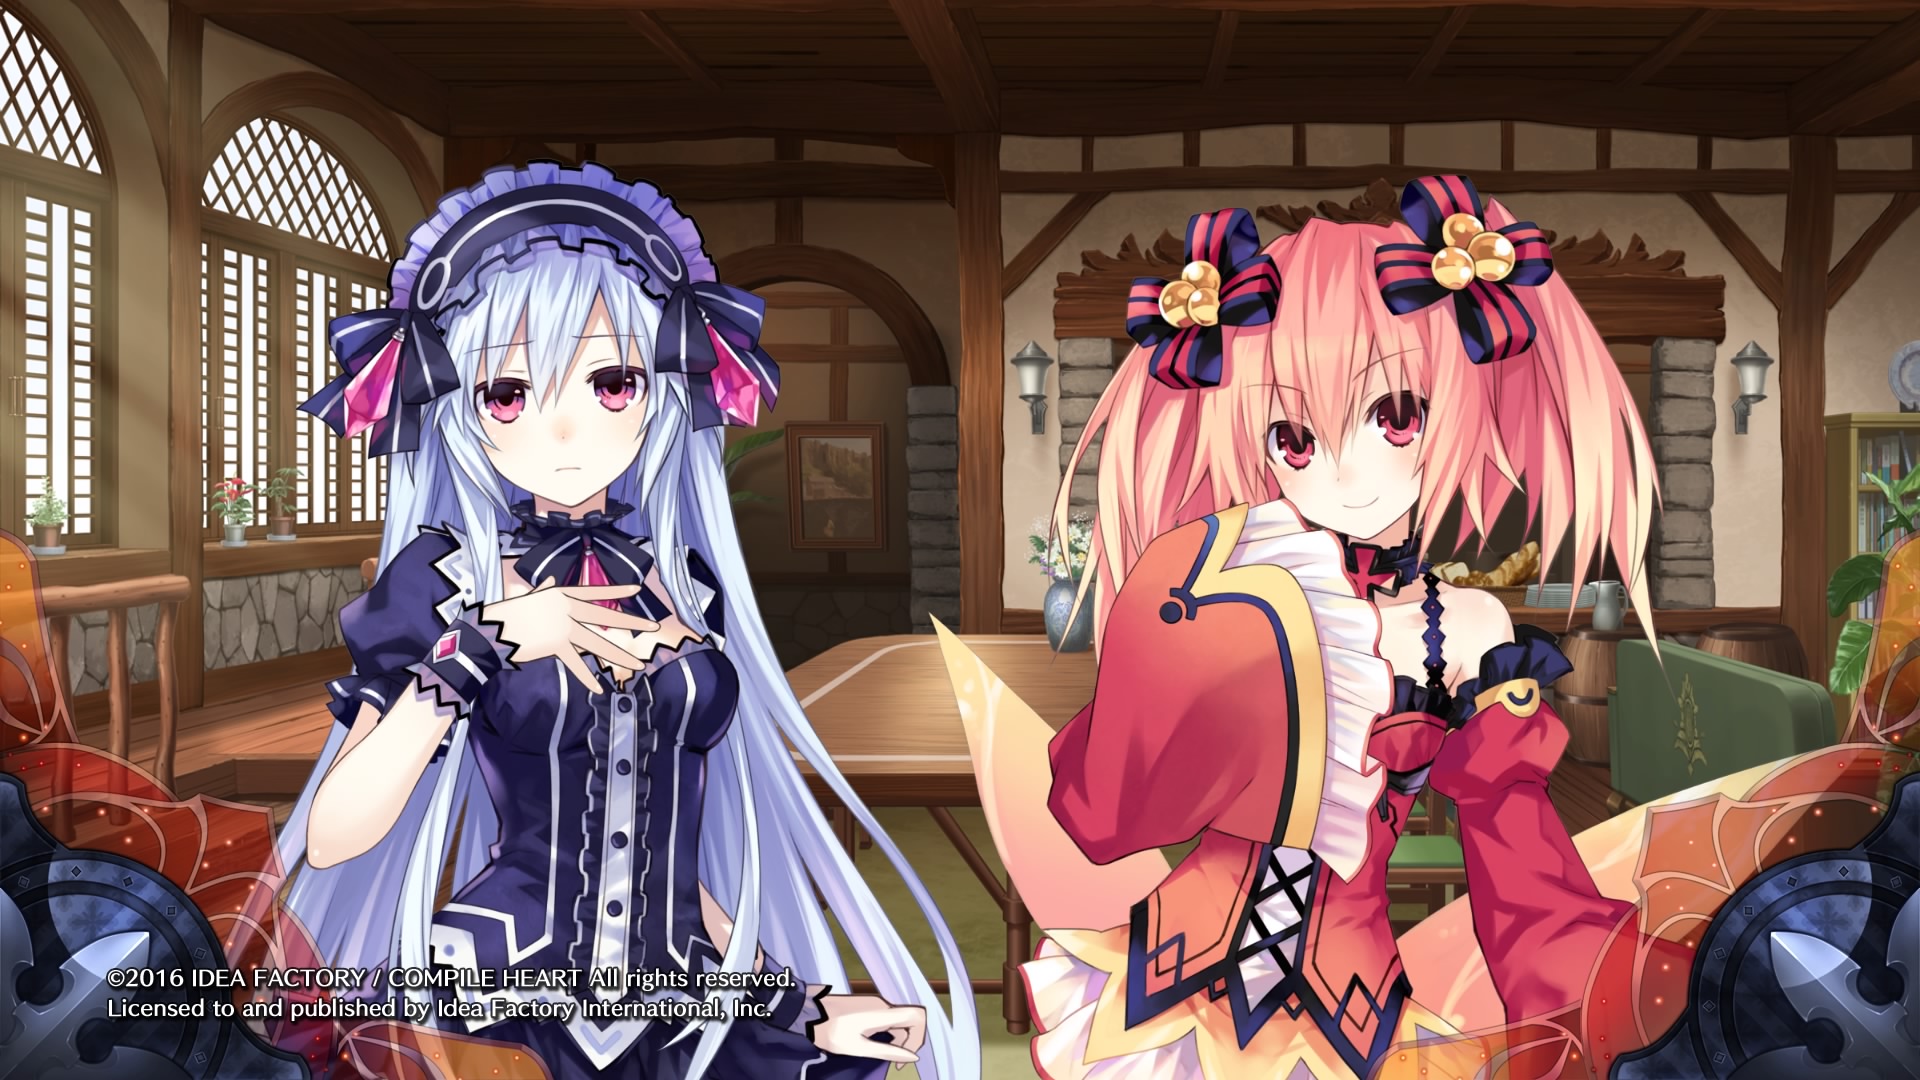 Fairy Fencer F moves back to Monday nights